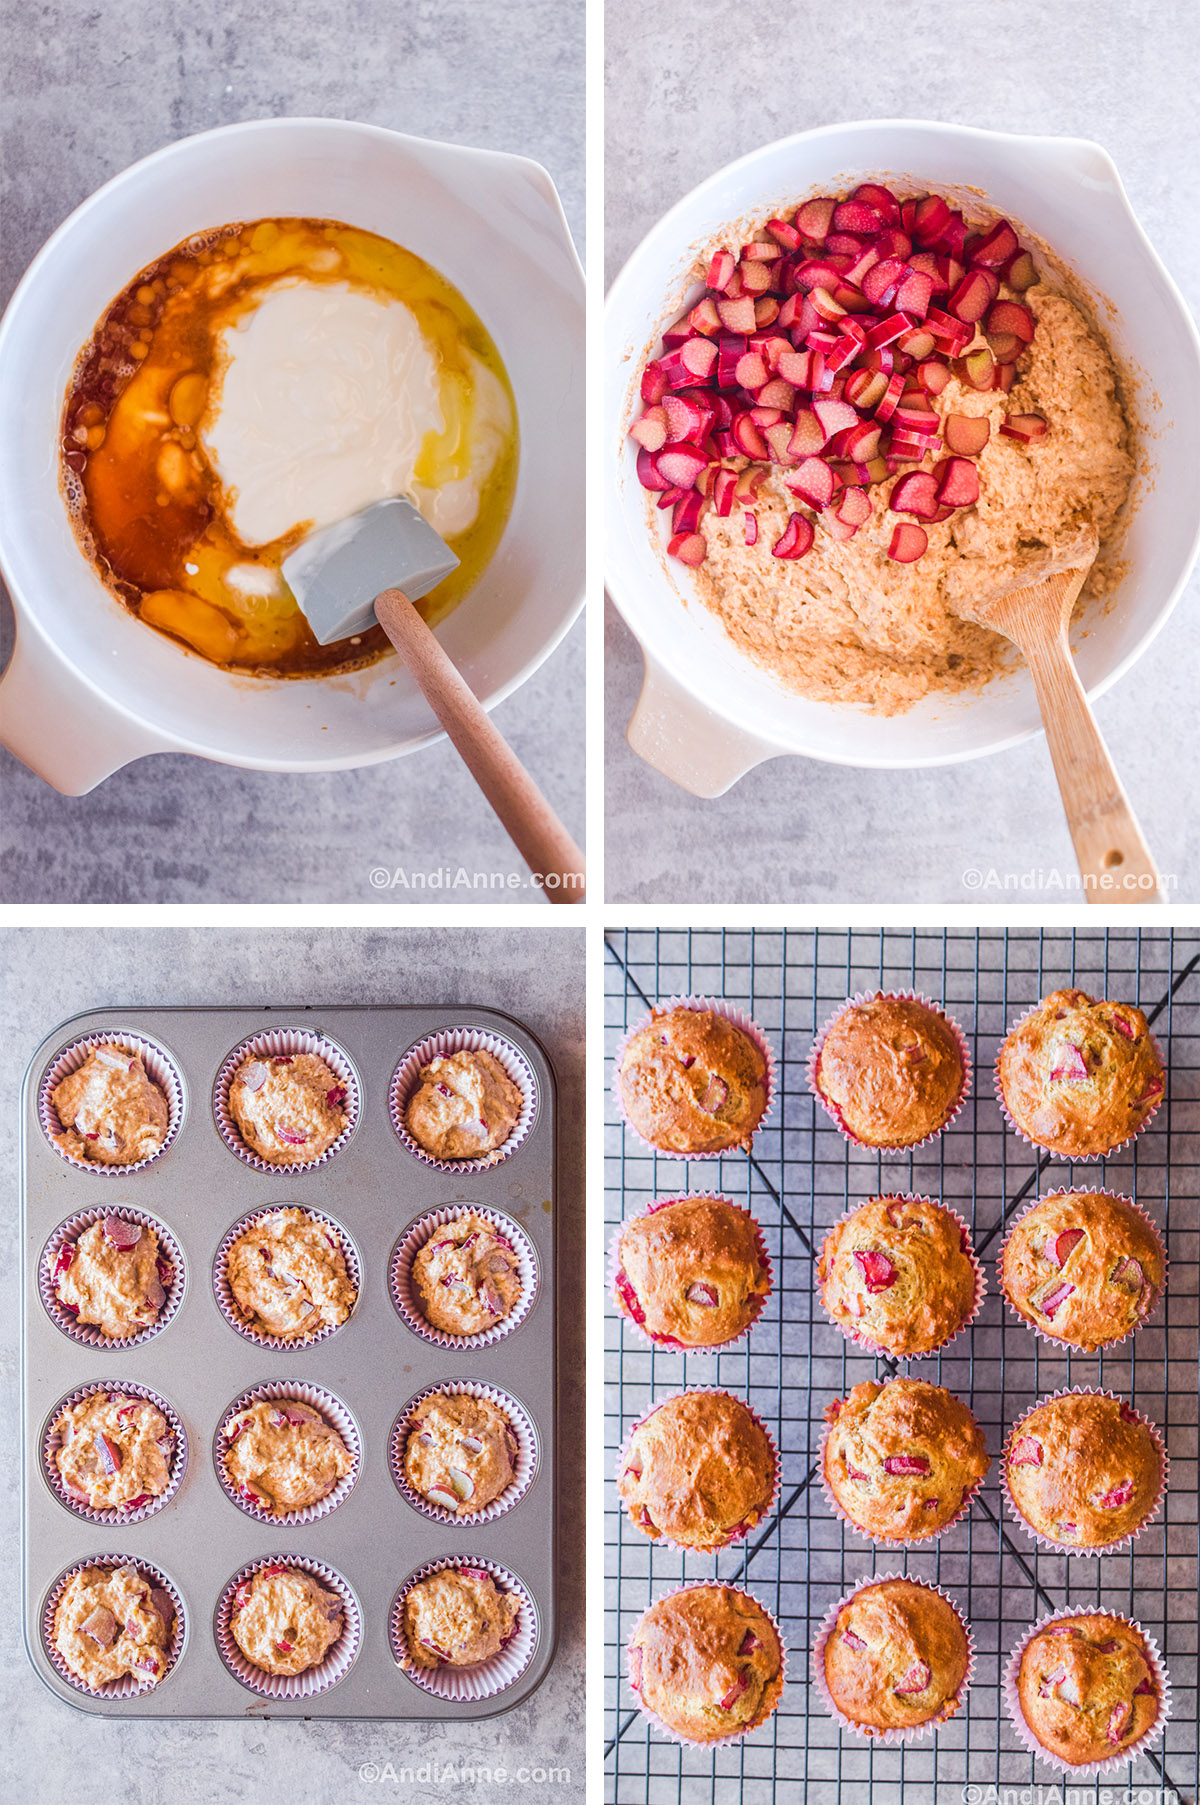 Four images showing steps to make recipe including mixing bowls with unmixed ingredients and a spoon, uncooked muffins in paper liners in muffin pan, and baked muffins on a wire rack.